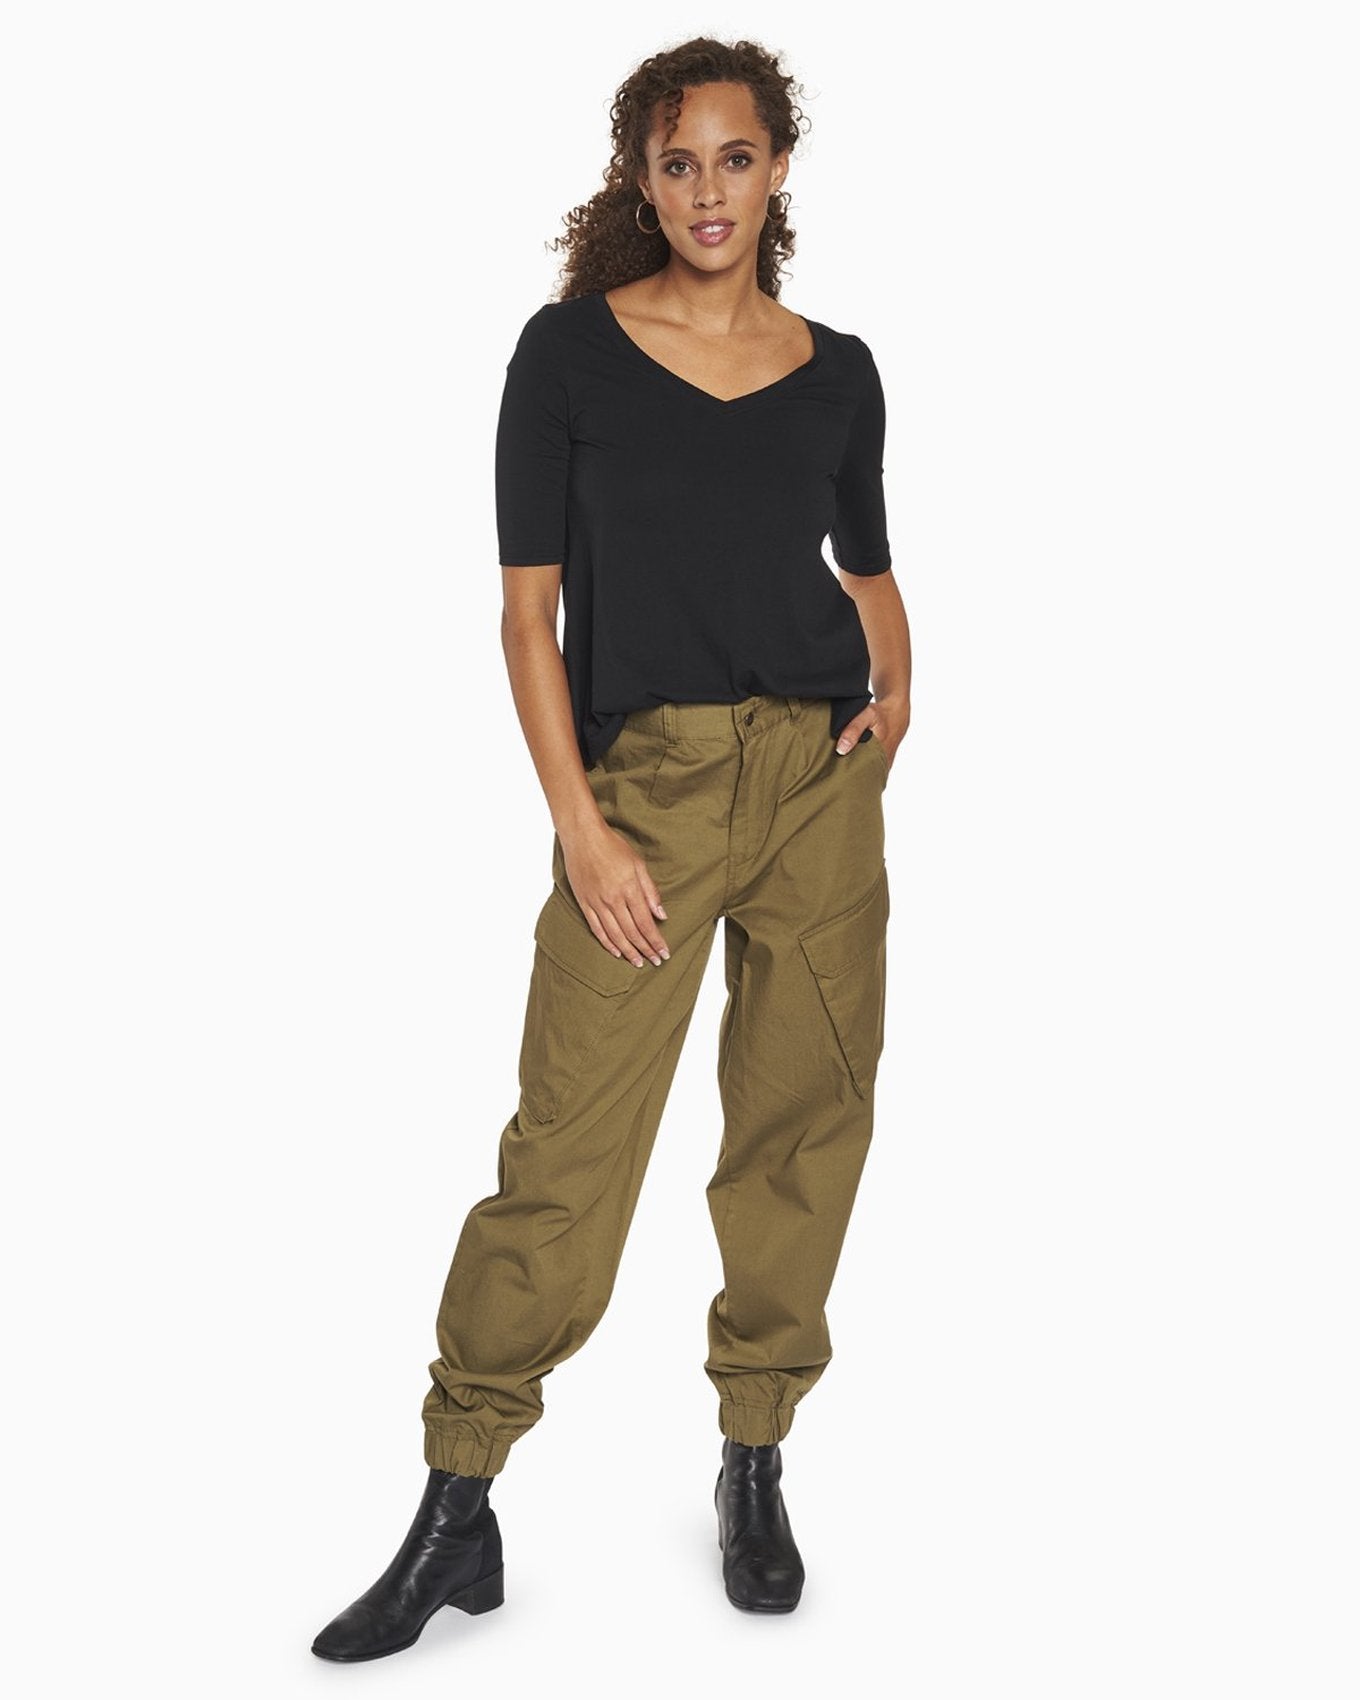 YesAnd Organic Utility Jogger Jogger in color Olive Branch and shape jogger/sweatpant